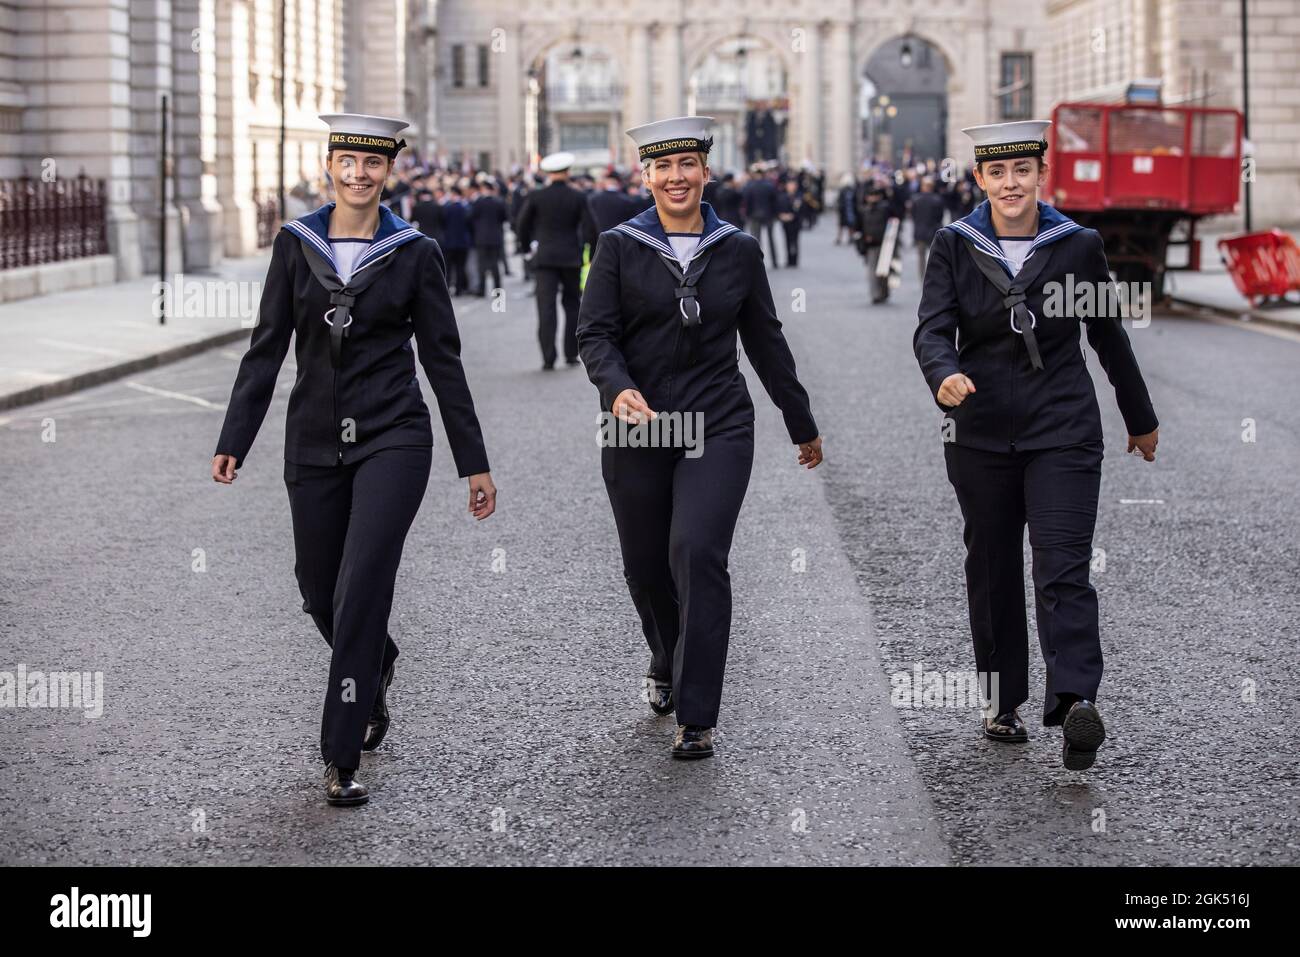 ROYAL NAVY VETERANS MARCH FOR FALLEN COMRADES AT THE CENOTAPH IN WHITEHALL, LONDON, UK 12th September 2021. This was the first-time veterans have marc Stock Photo